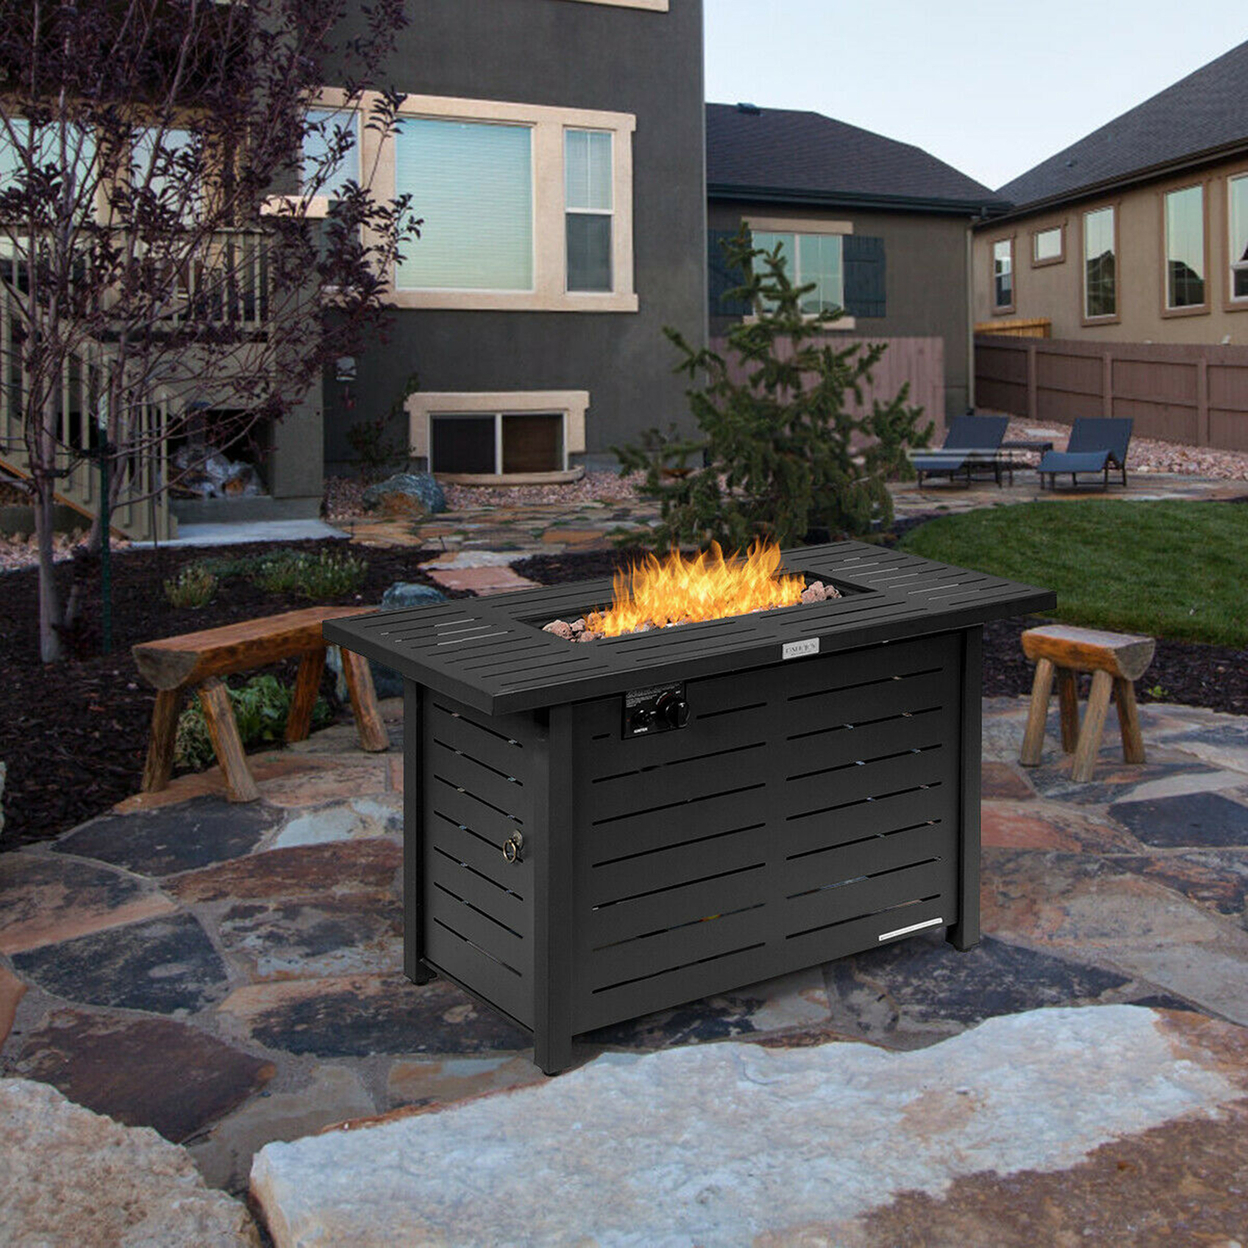 42'' Rectangular Propane Gas Fire Pit 60,000 Btu Heater Outdoor Table W/ Cover